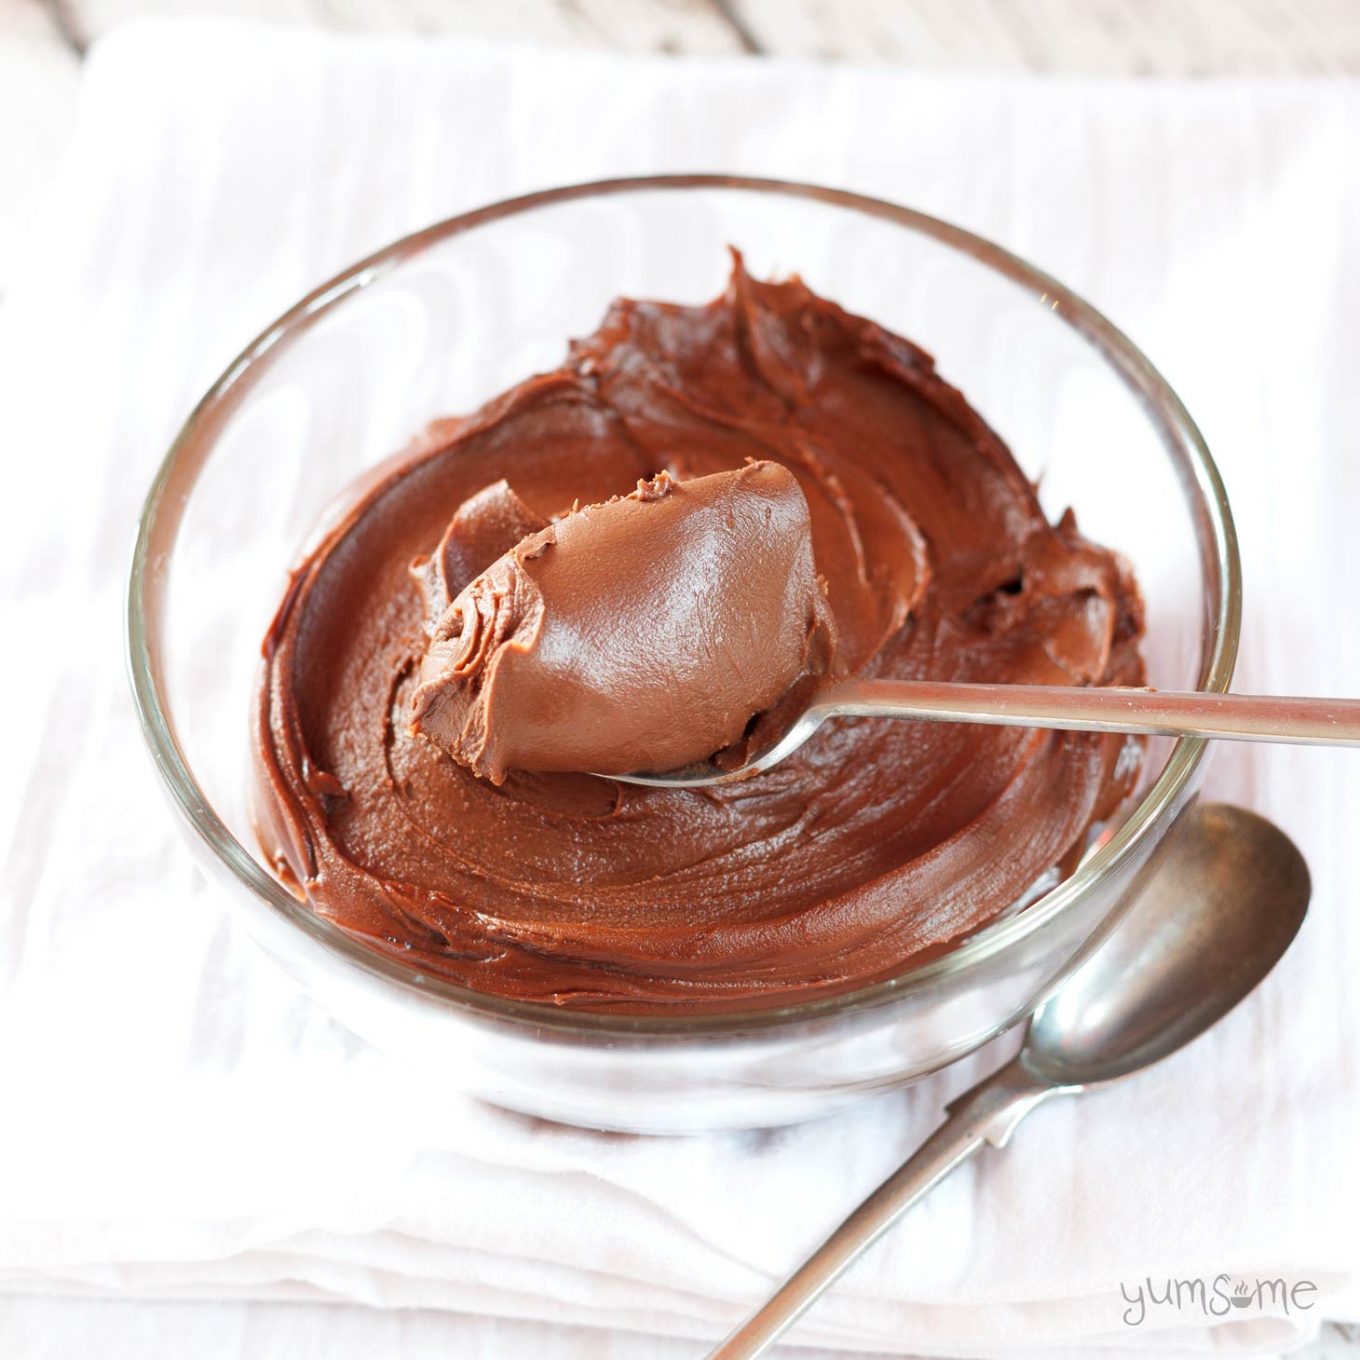 A glass bowl containing home-made vegan Nutella and a spoon.